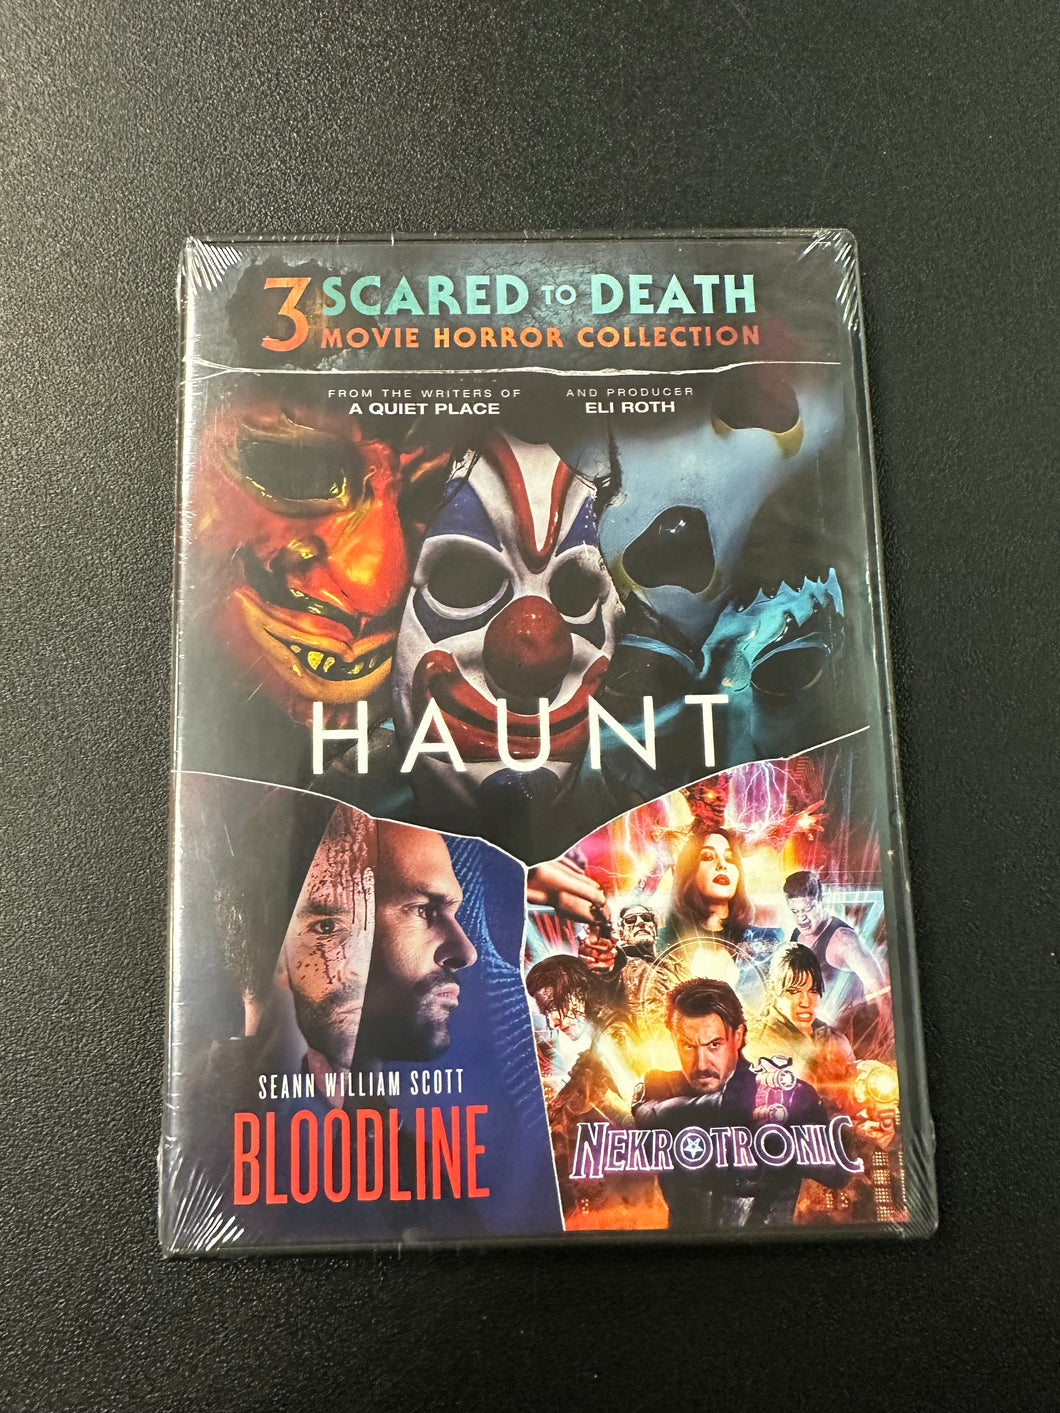 Scared to Death Haunt Bloodline & Nekrotronic Horror Collection [DVD] (NEW) Sealed